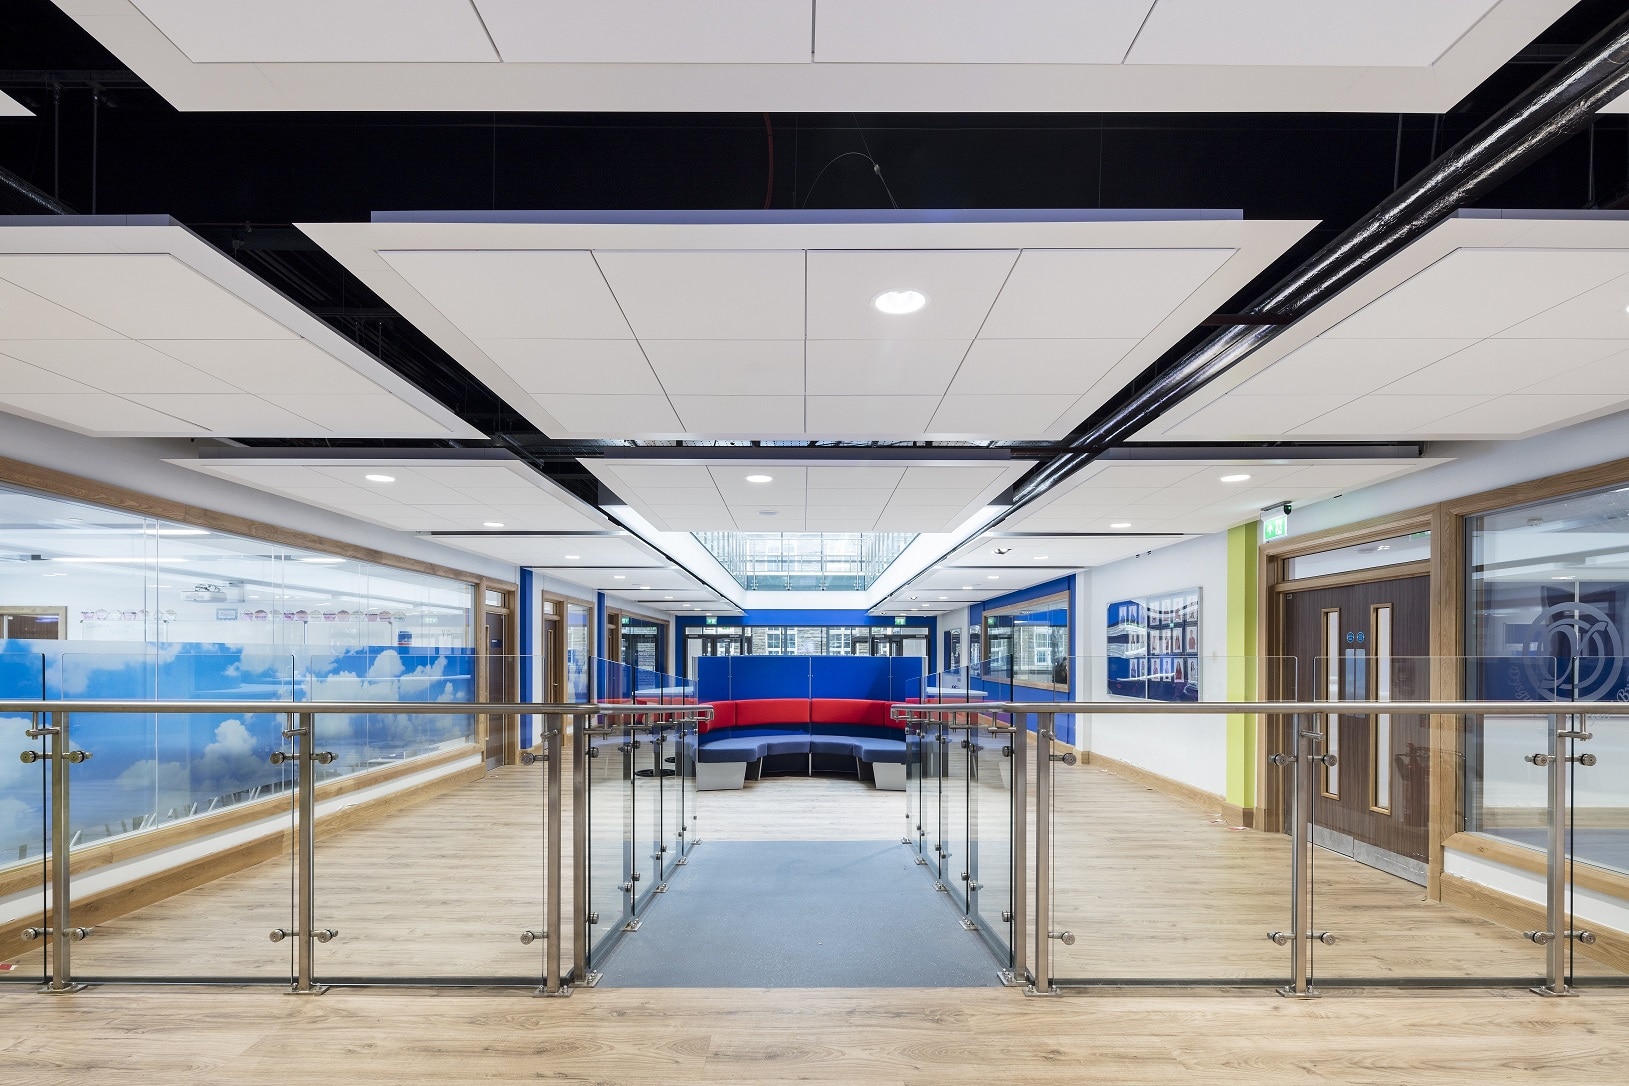 Metal and mineral fibre ceiling systems installed at Welsh school